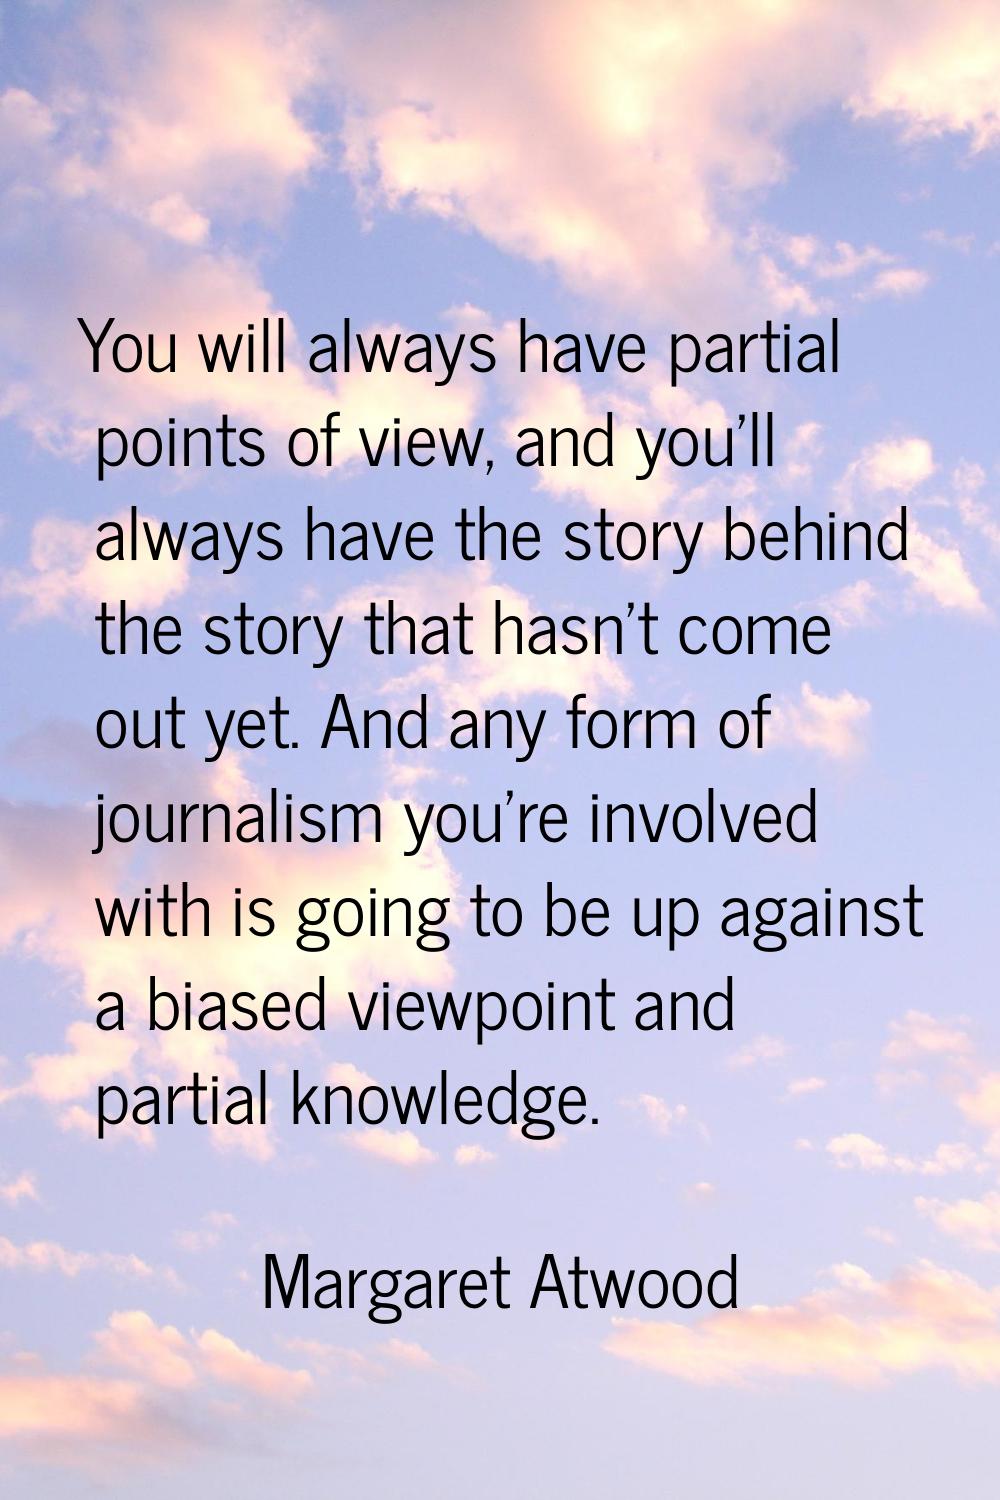 You will always have partial points of view, and you'll always have the story behind the story that